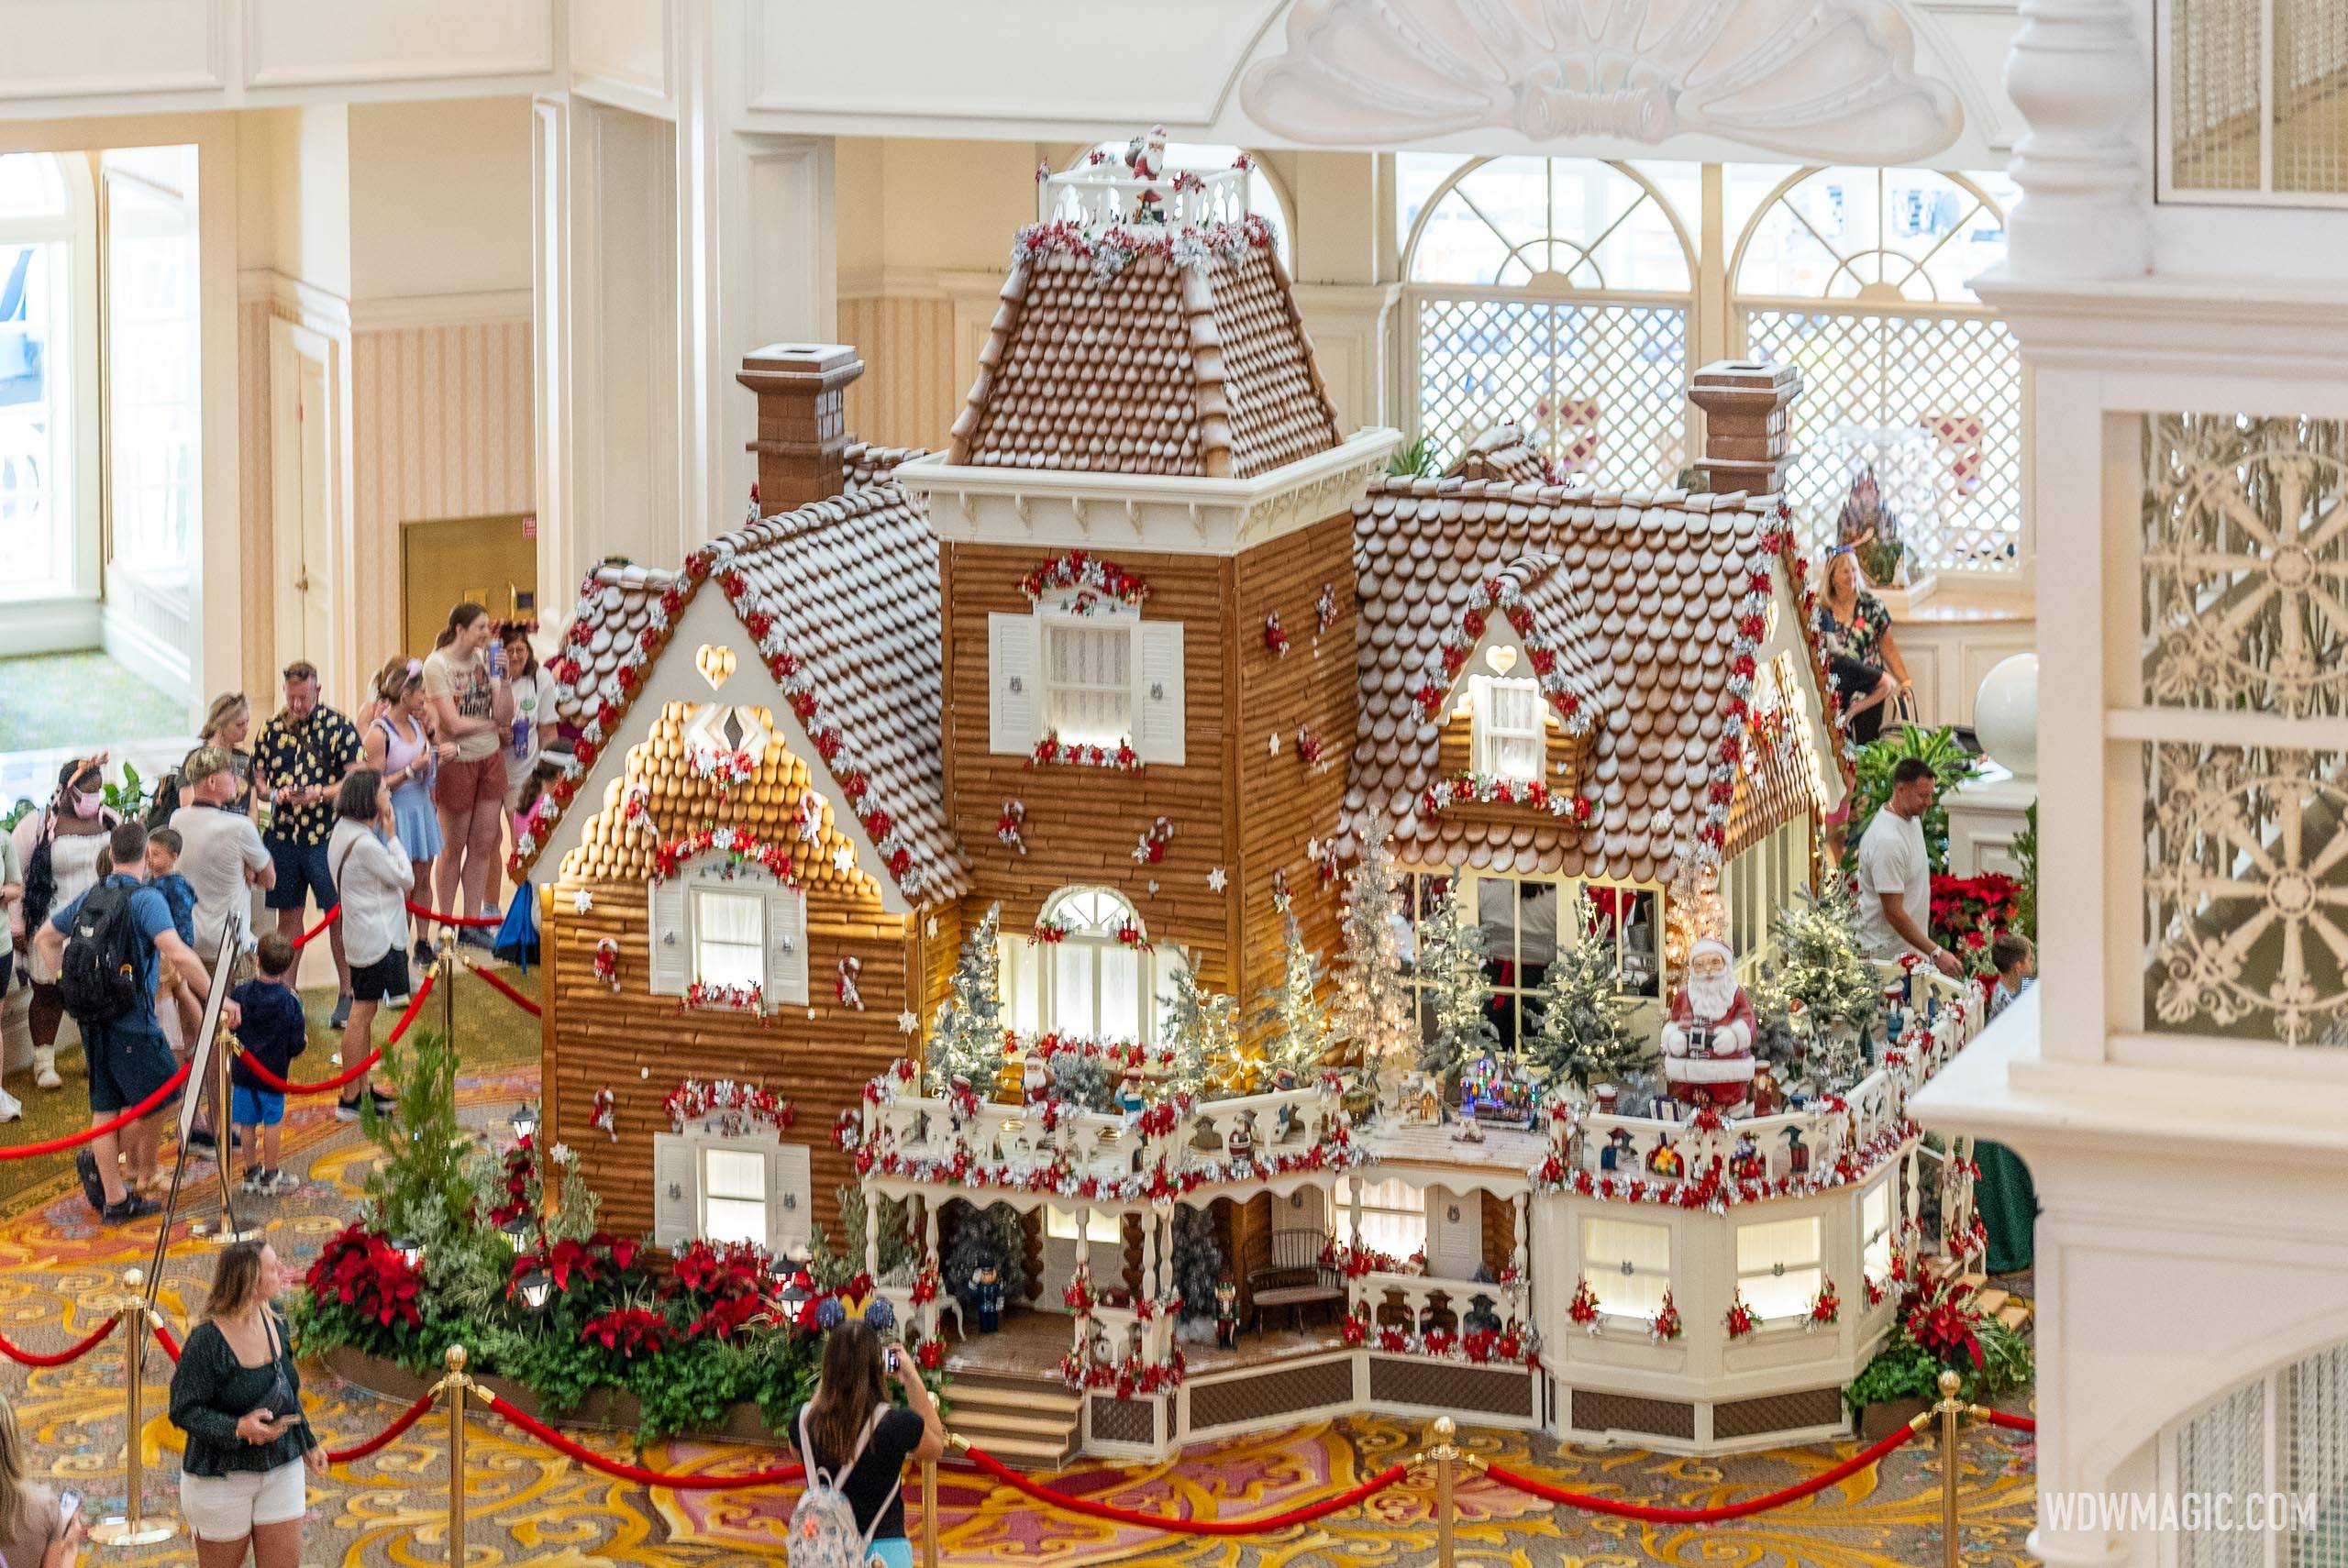 From Chocolate Santa to Sugar Snowflakes: Disney's Grand Floridian Gingerbread House is now open